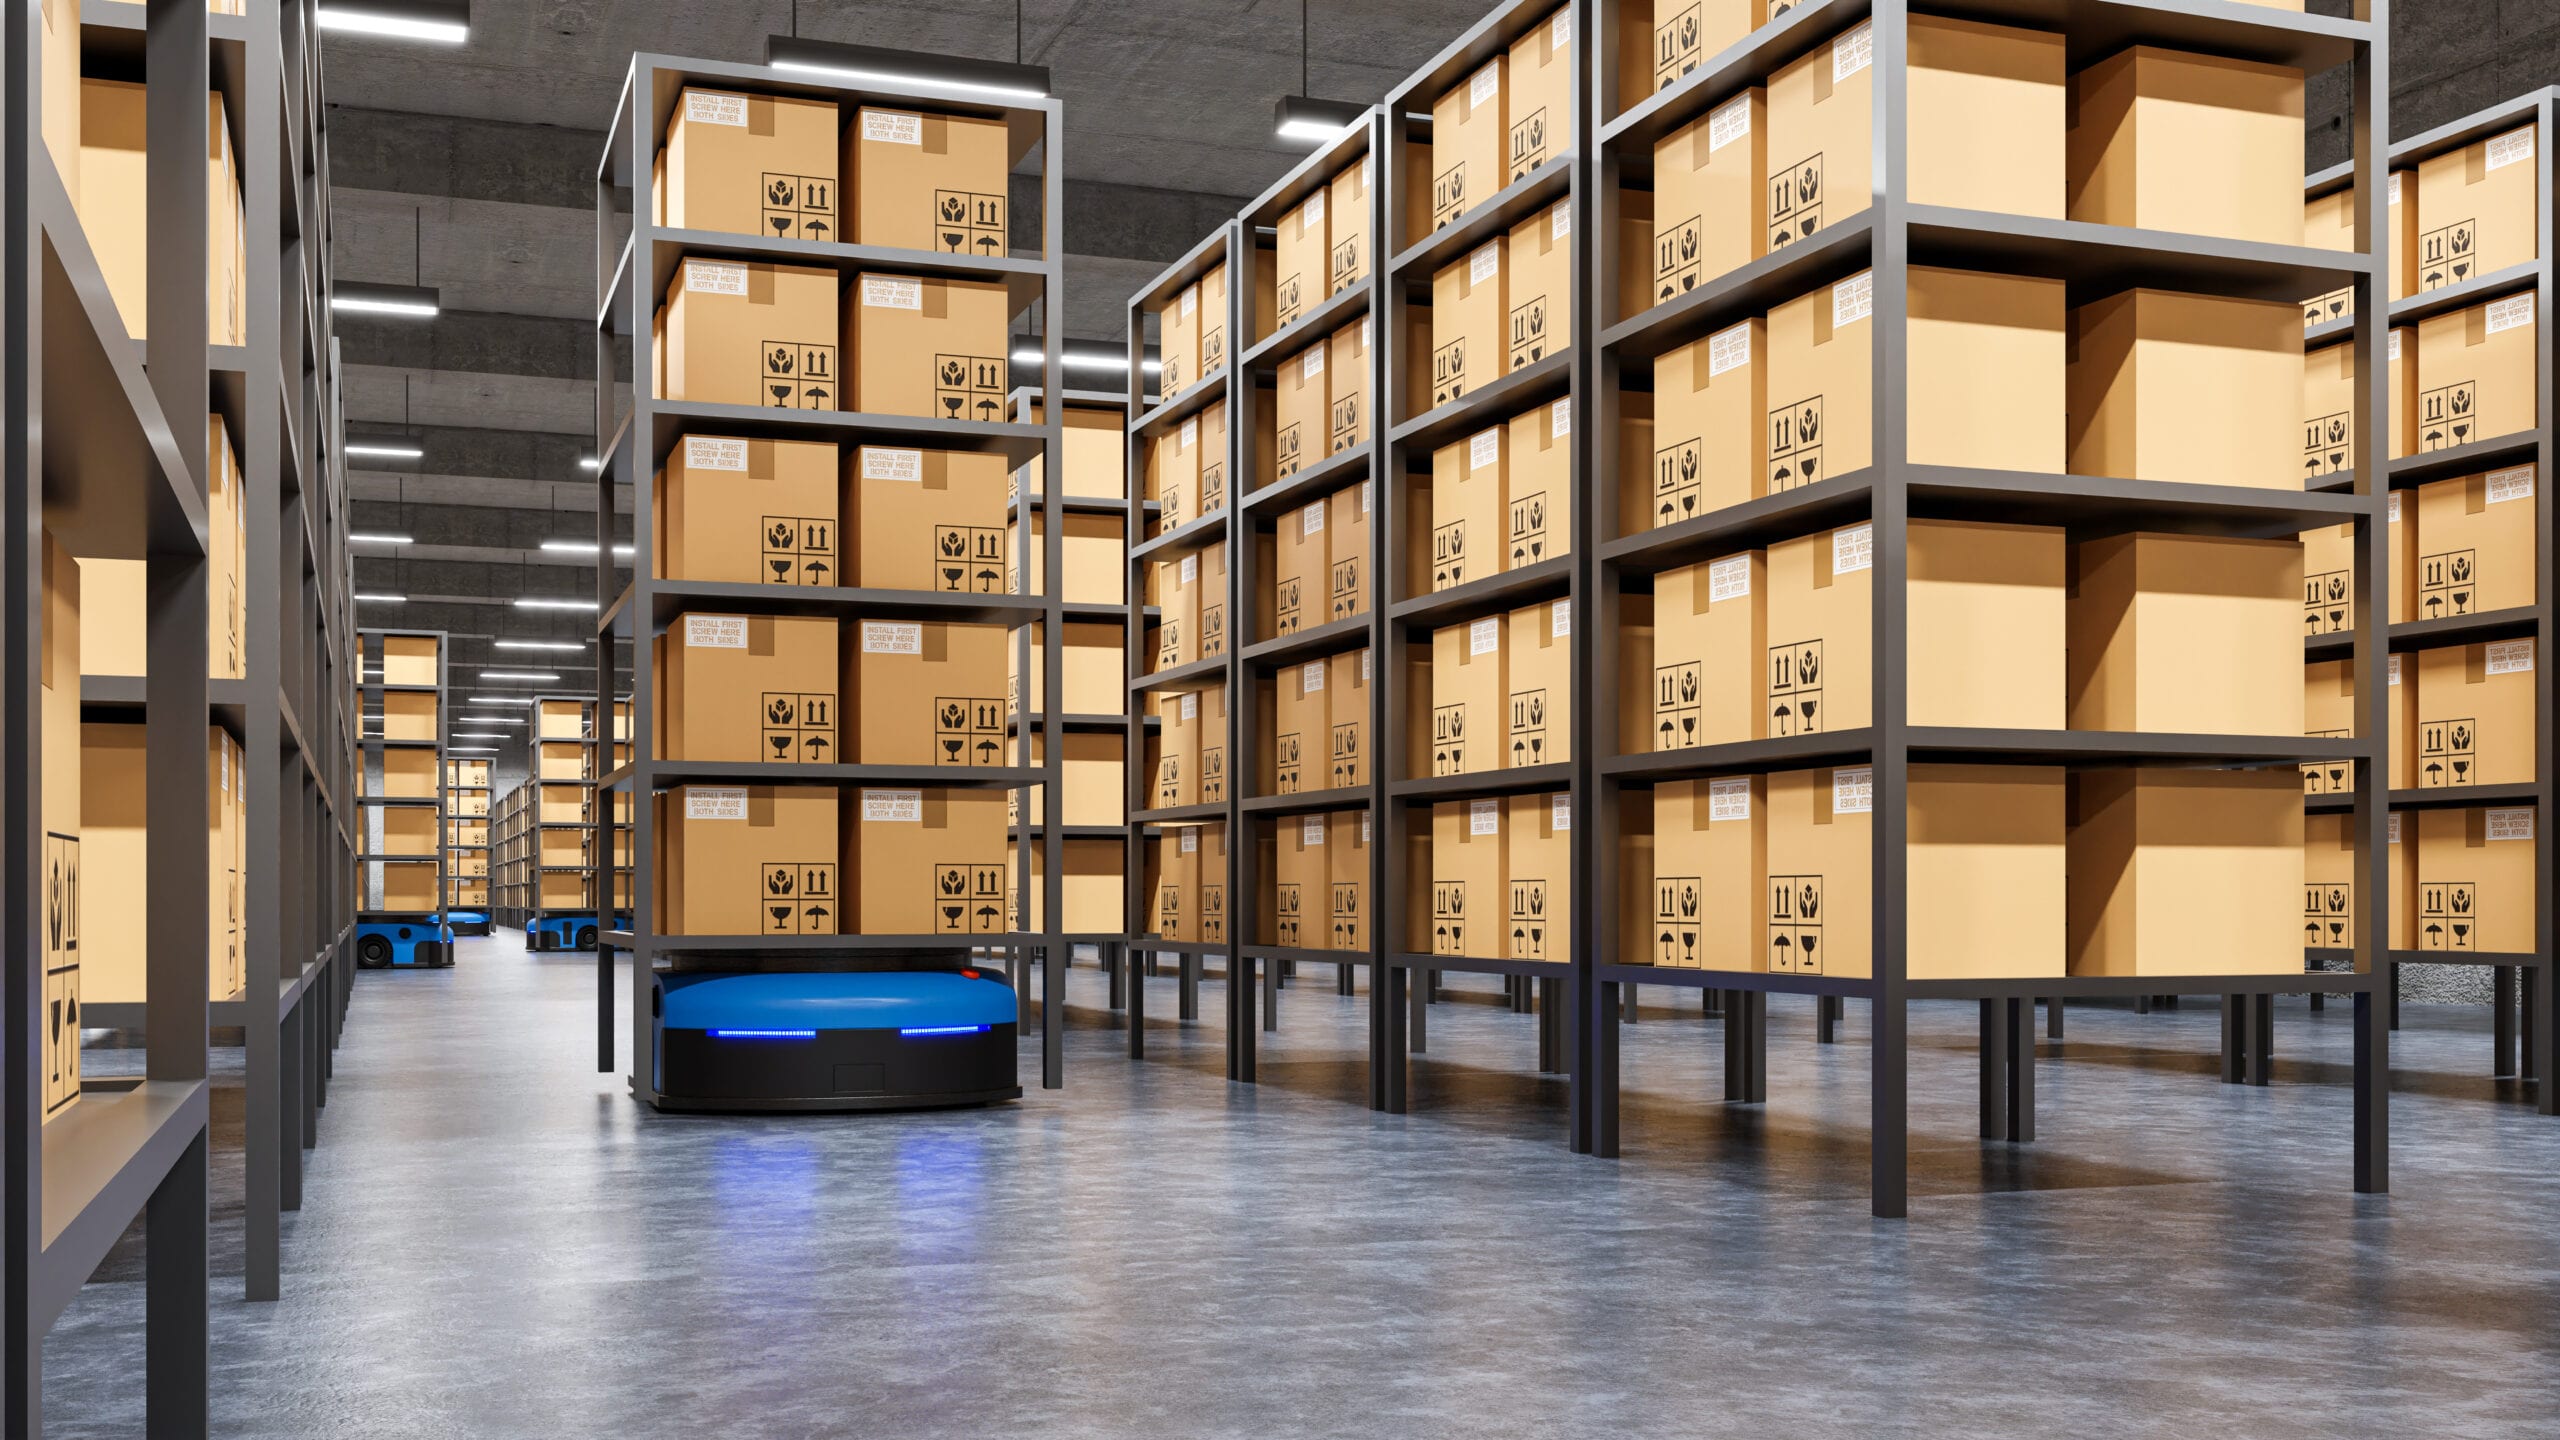 https://stockarea.io/blogs/wp-content/uploads/2021/06/robots-efficiently-sorting-hundreds-parcels-per-hour-automated-guided-vehicle-agv-3d-rendering-scaled.jpg